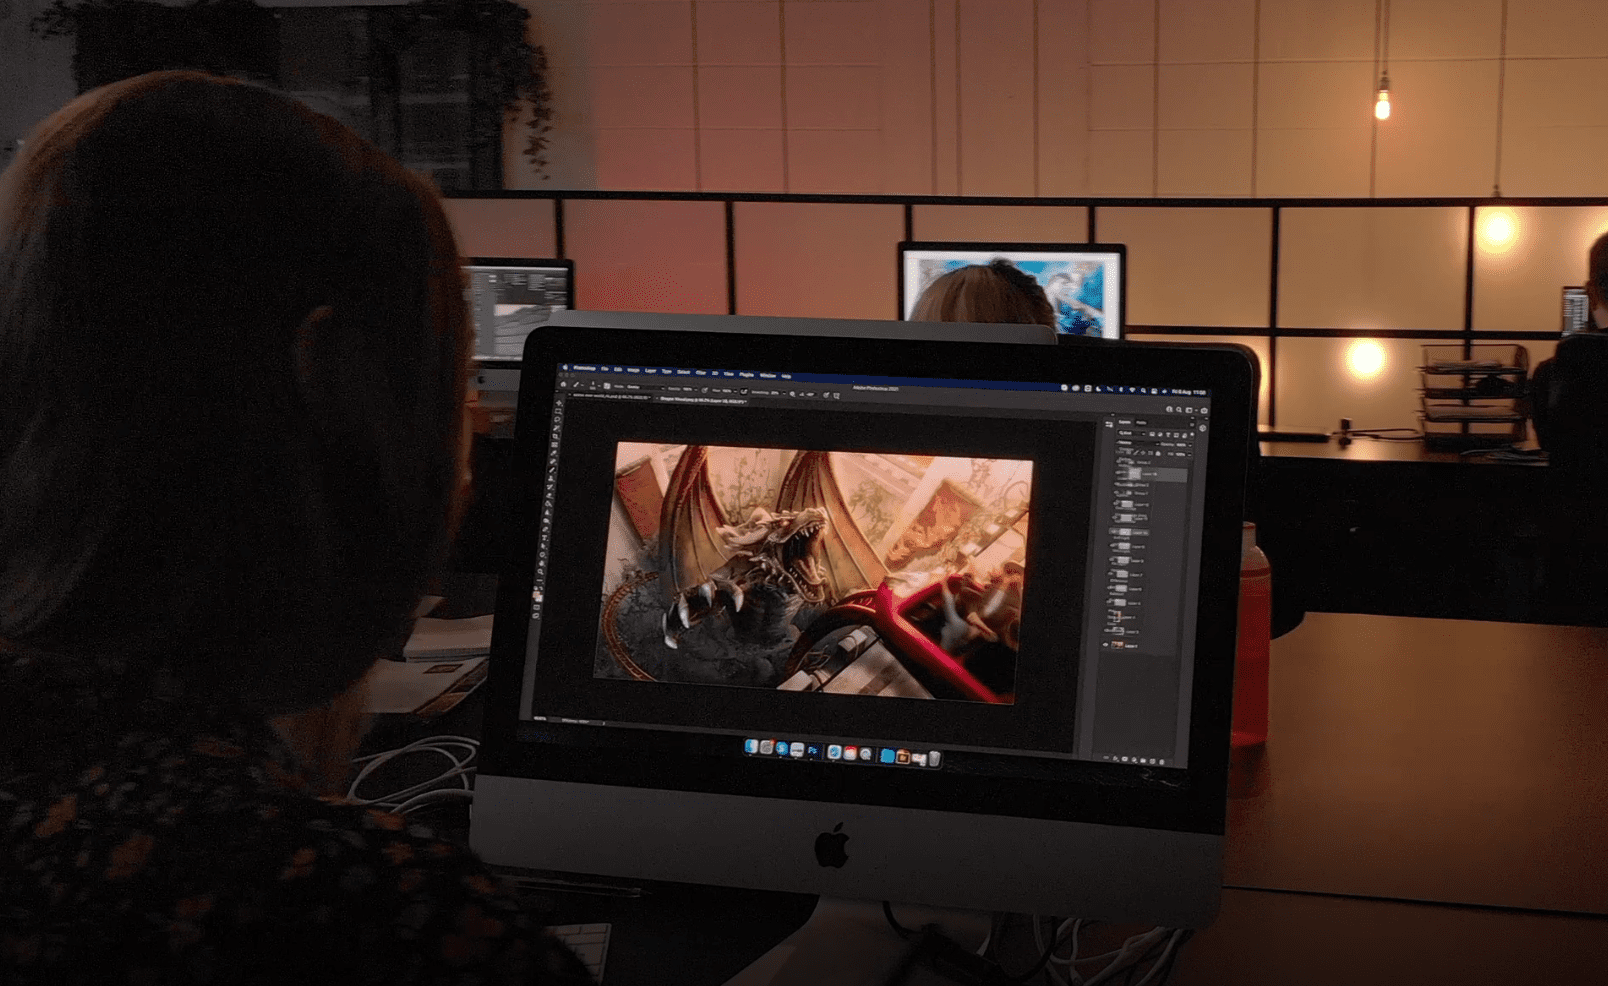 A person creating concept art on Photoshop on a computer in a dimly lit room